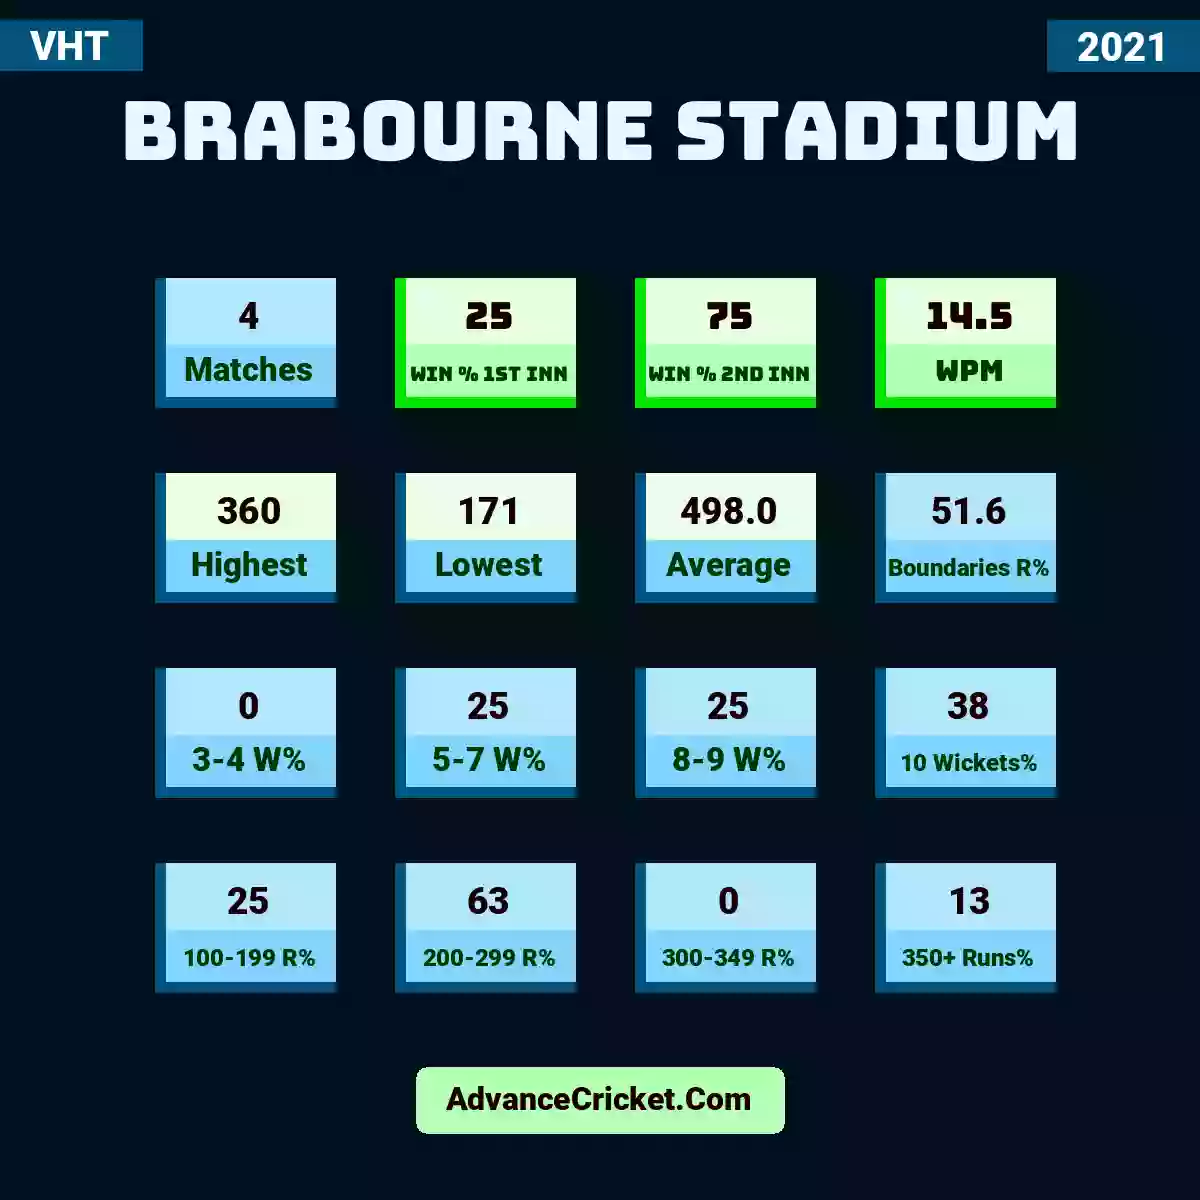 Image showing Brabourne Stadium with Matches: 4, Win % 1st Inn: 25, Win % 2nd Inn: 75, WPM: 14.5, Highest: 360, Lowest: 171, Average: 498.0, Boundaries R%: 51.6, 3-4 W%: 0, 5-7 W%: 25, 8-9 W%: 25, 10 Wickets%: 38, 100-199 R%: 25, 200-299 R%: 63, 300-349 R%: 0, 350+ Runs%: 13.